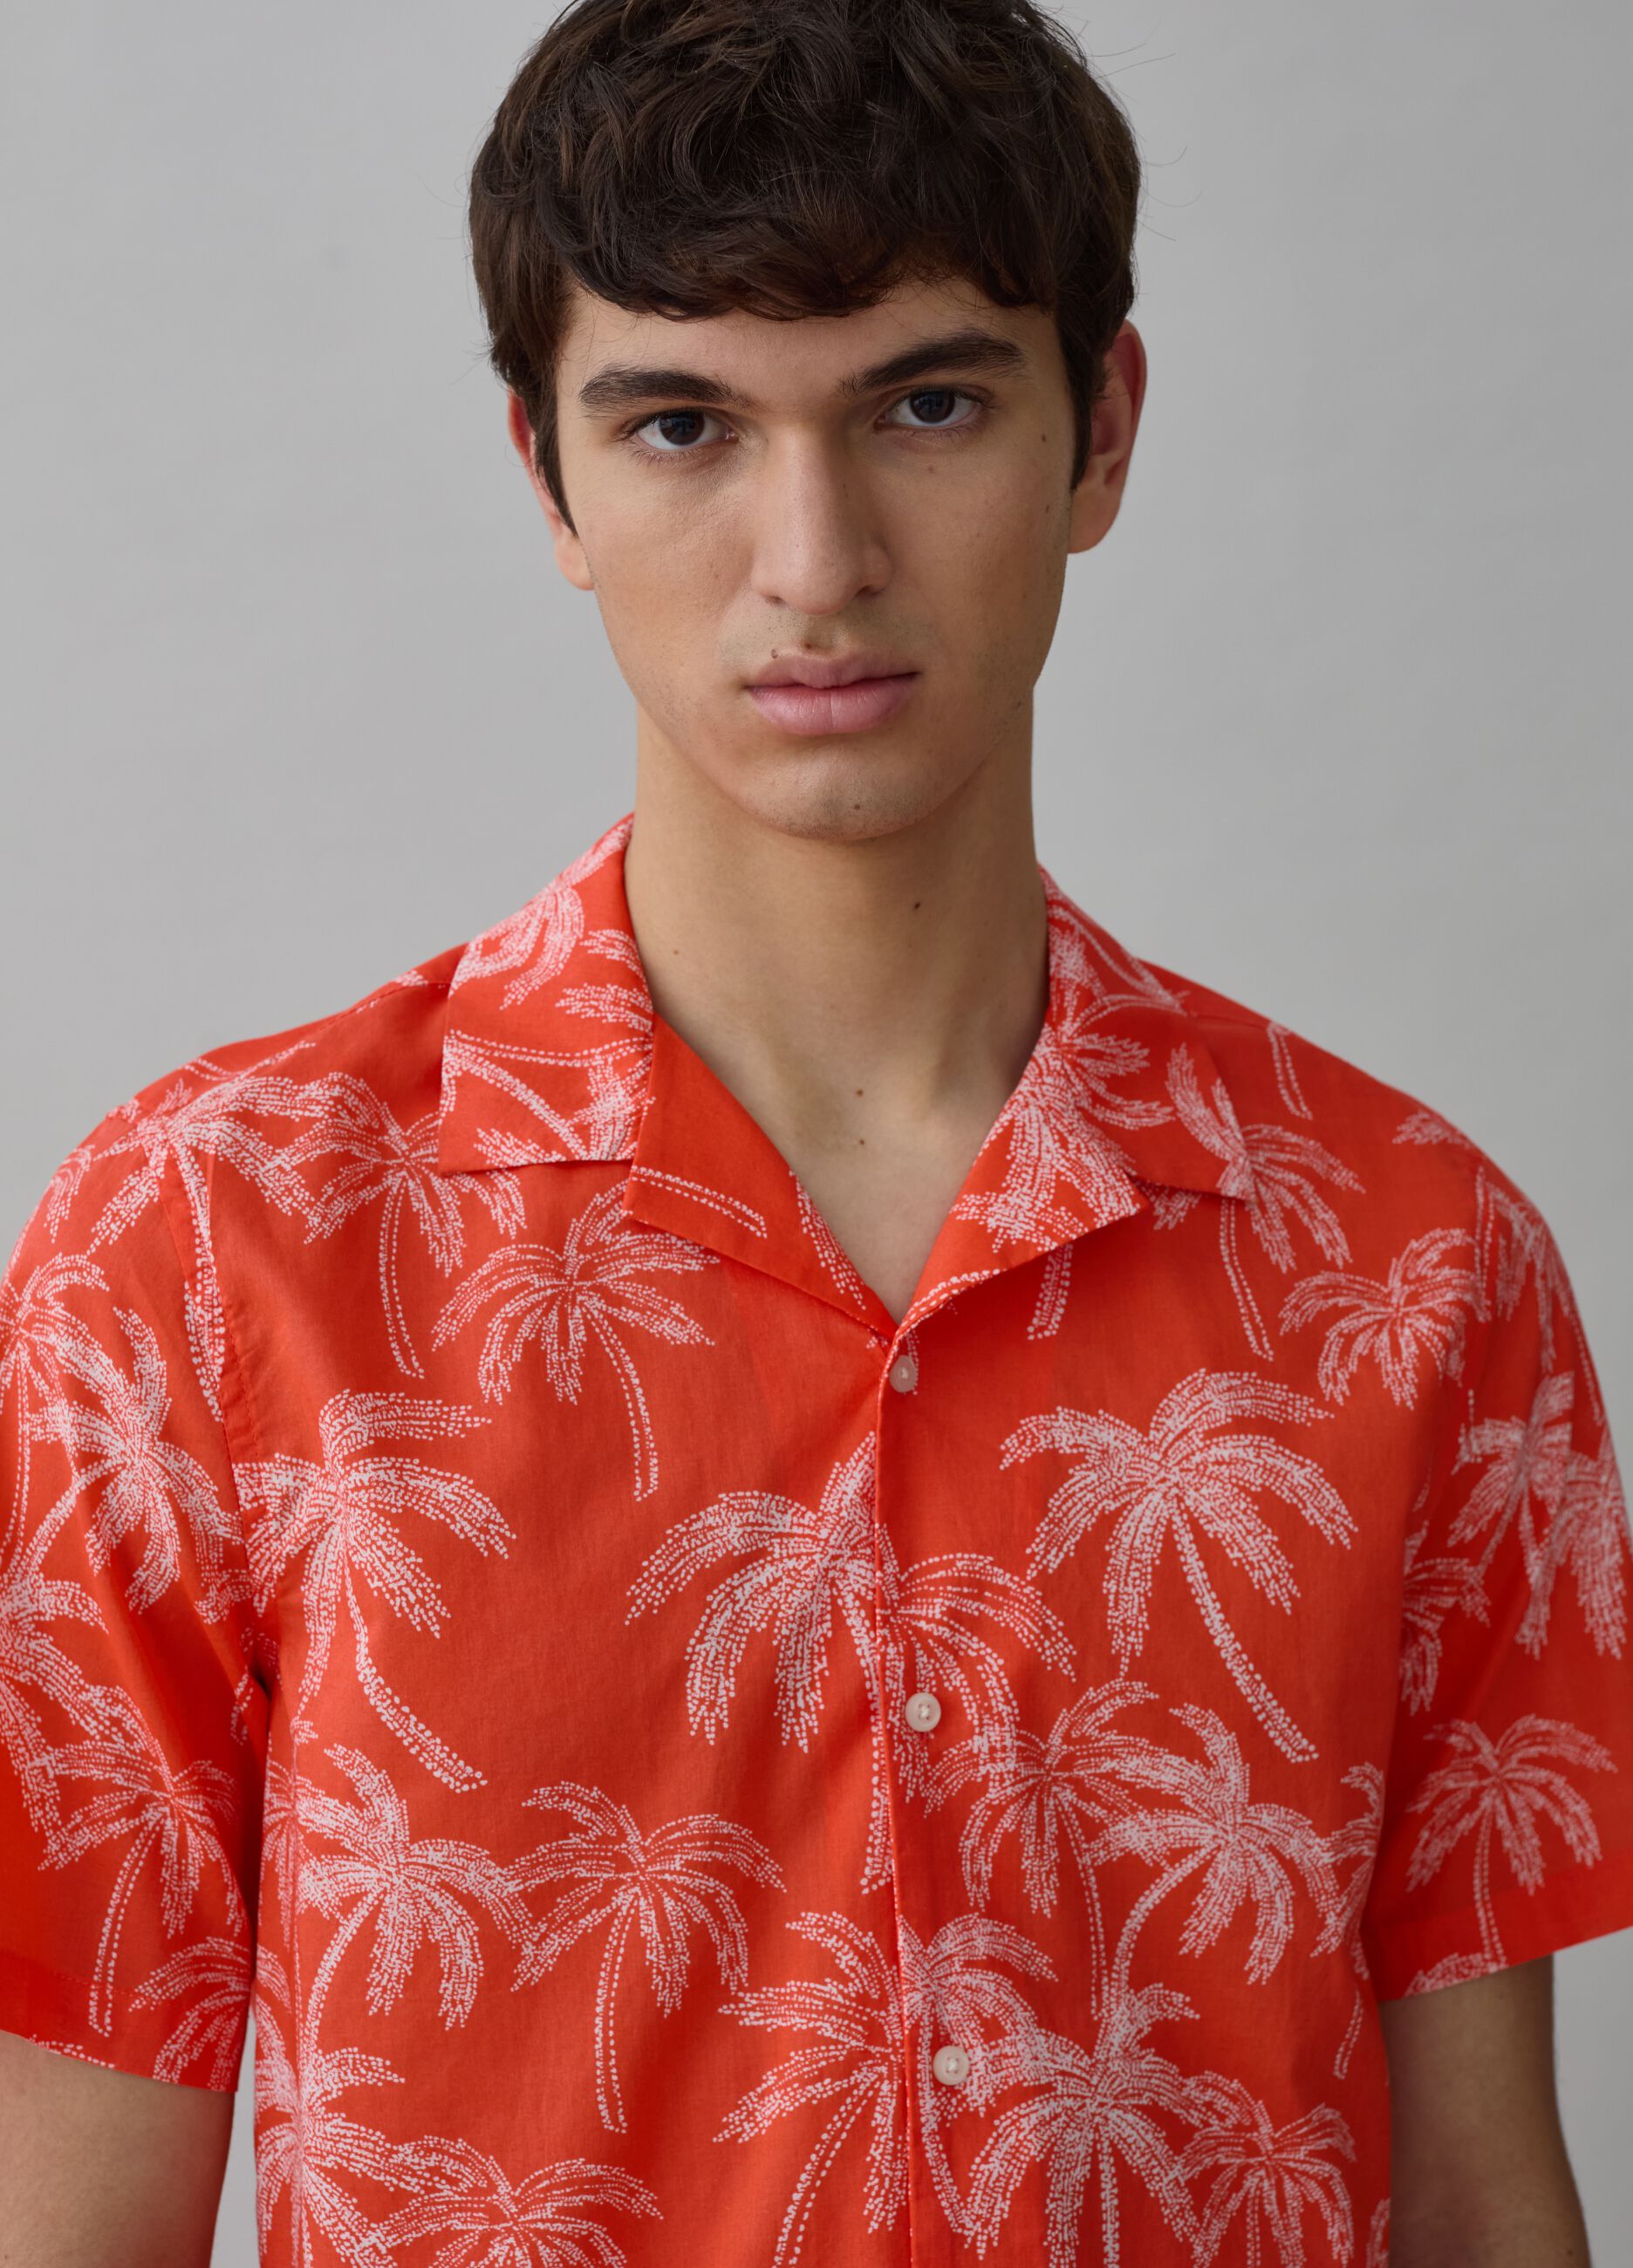 Short-sleeved shirt with palms print